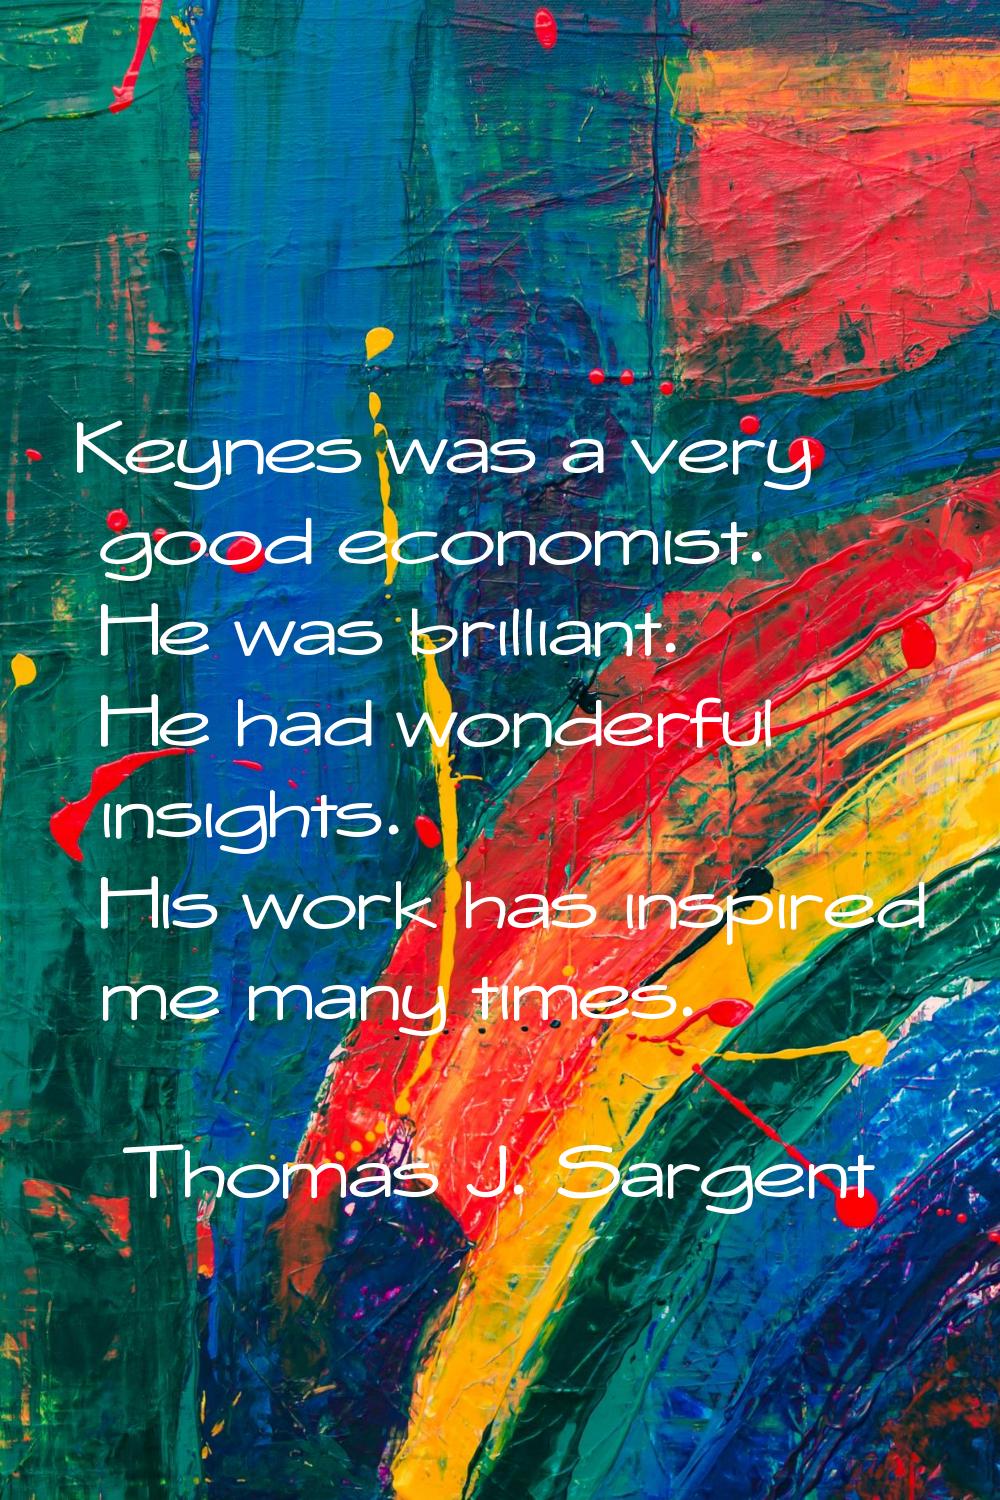 Keynes was a very good economist. He was brilliant. He had wonderful insights. His work has inspire